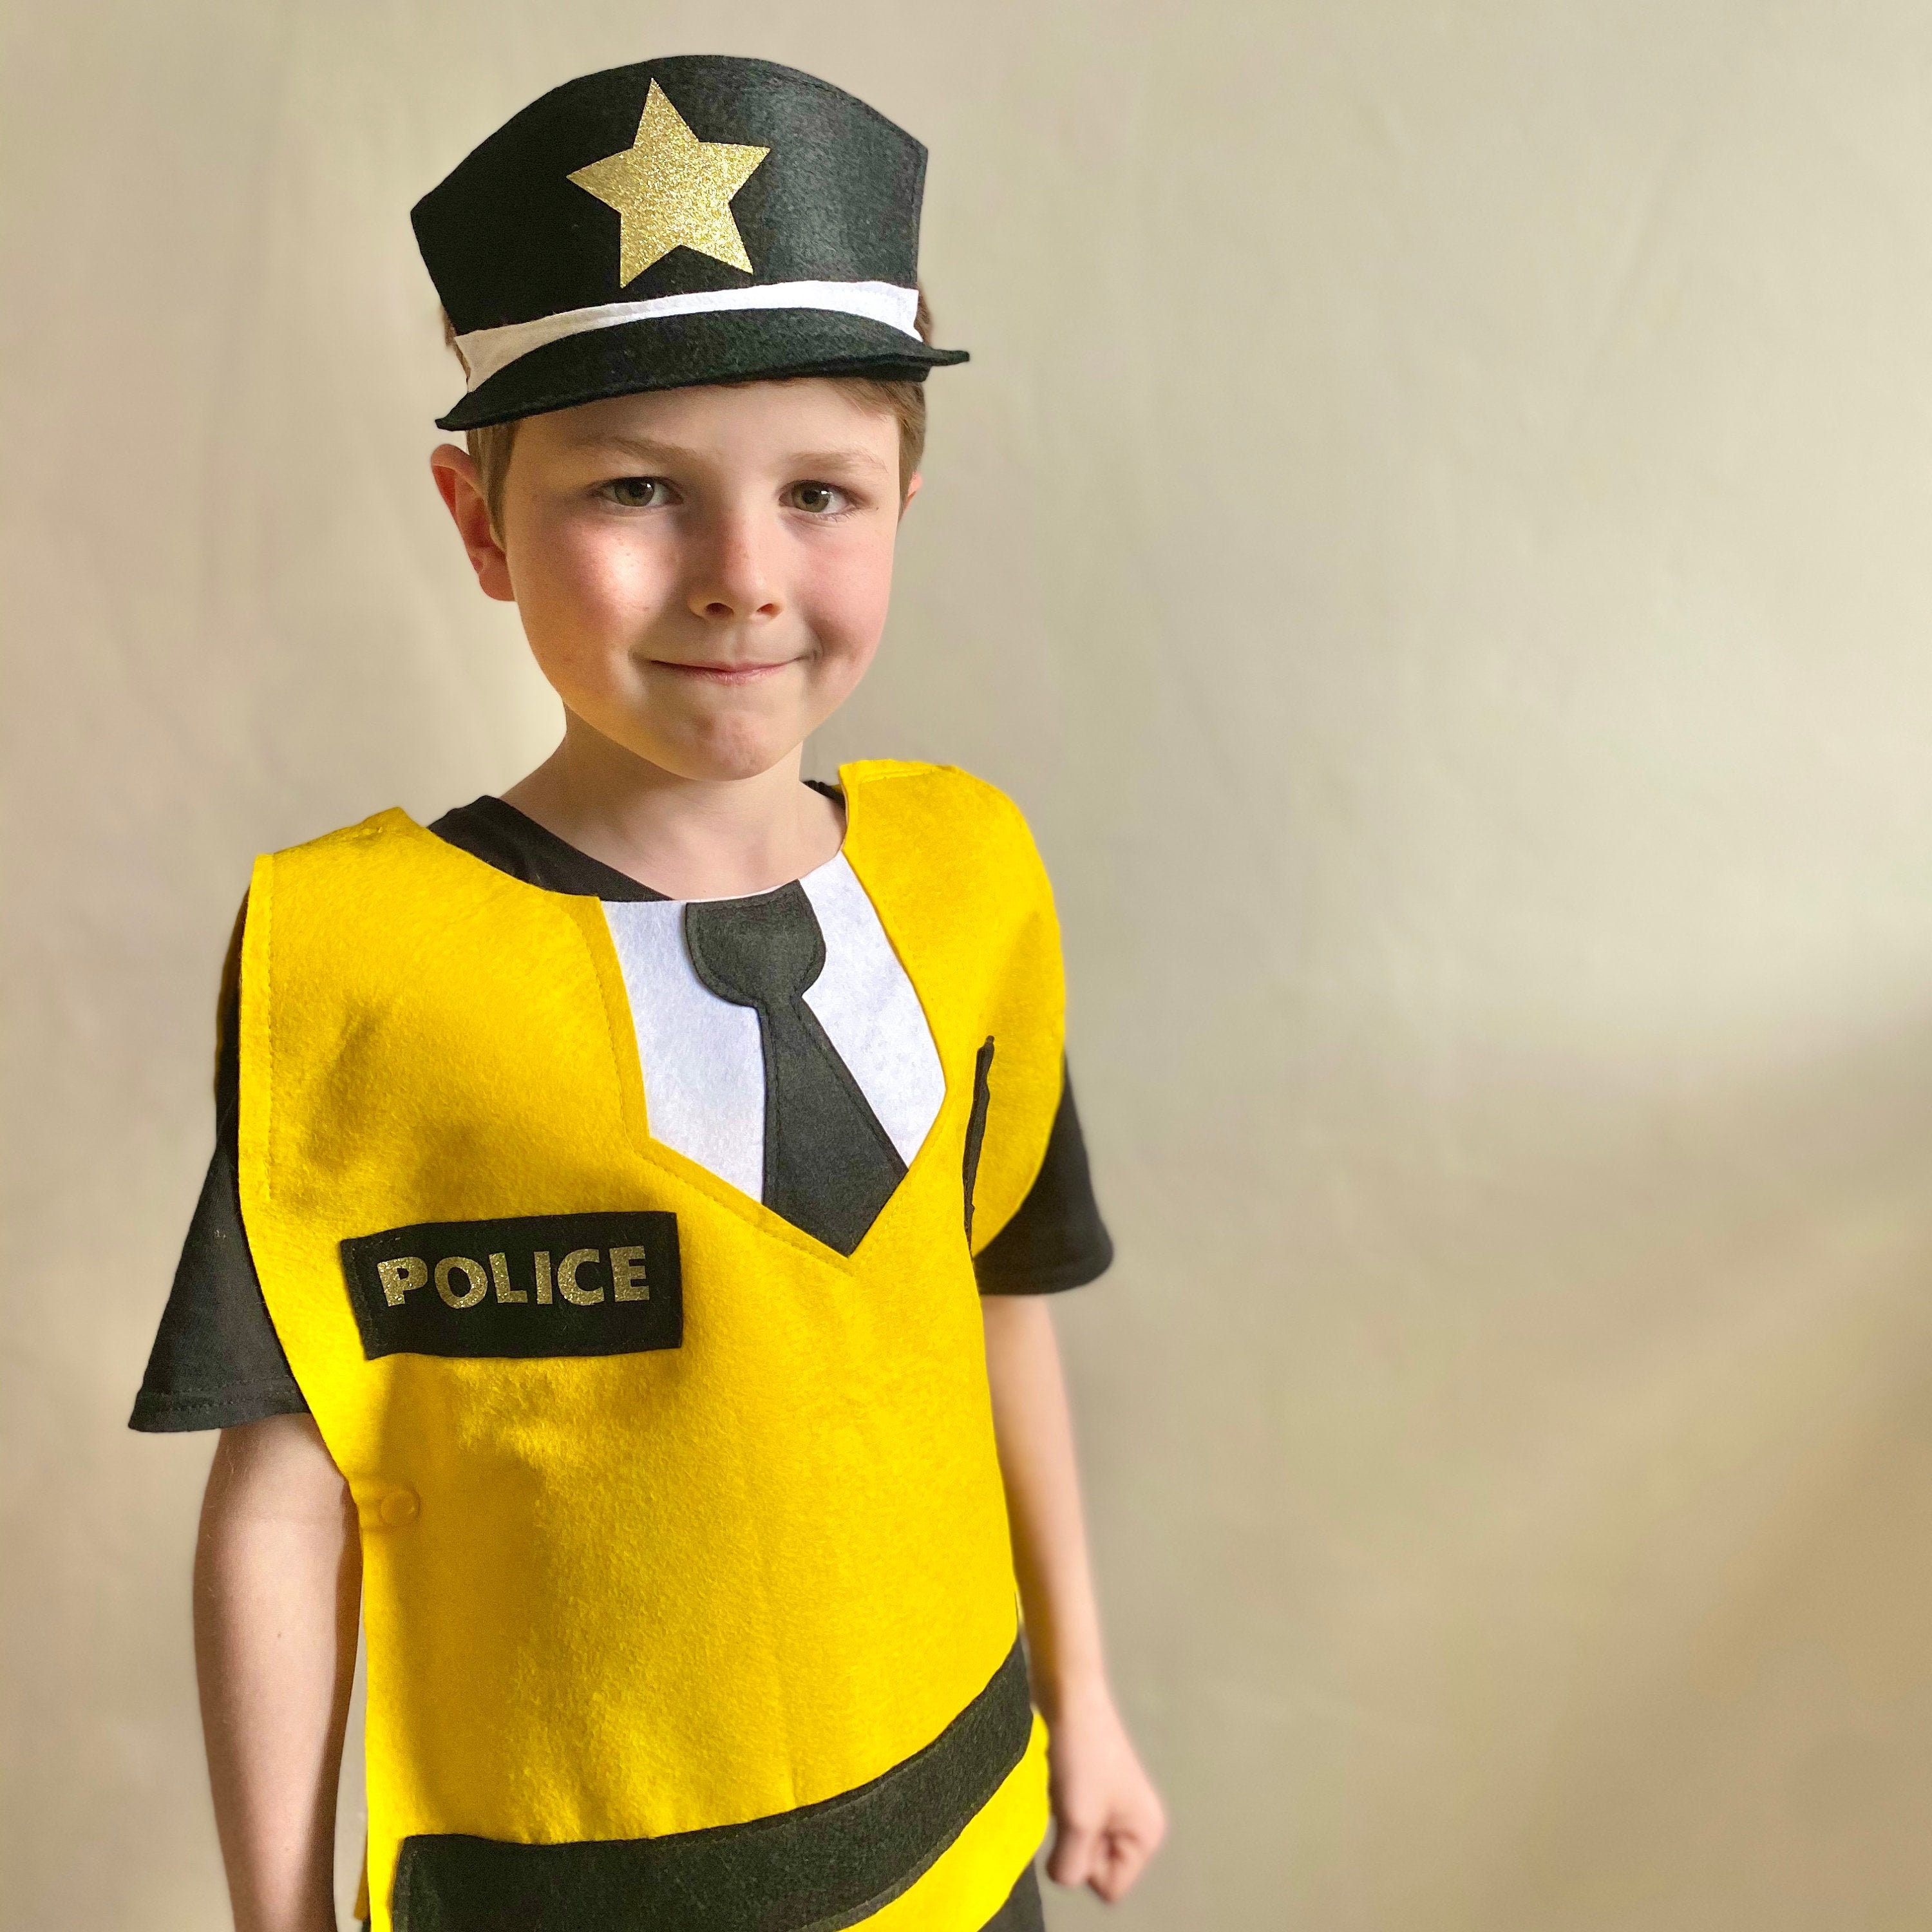 Men's Police Officer Costume from California Costumes XL - Cop X-Large